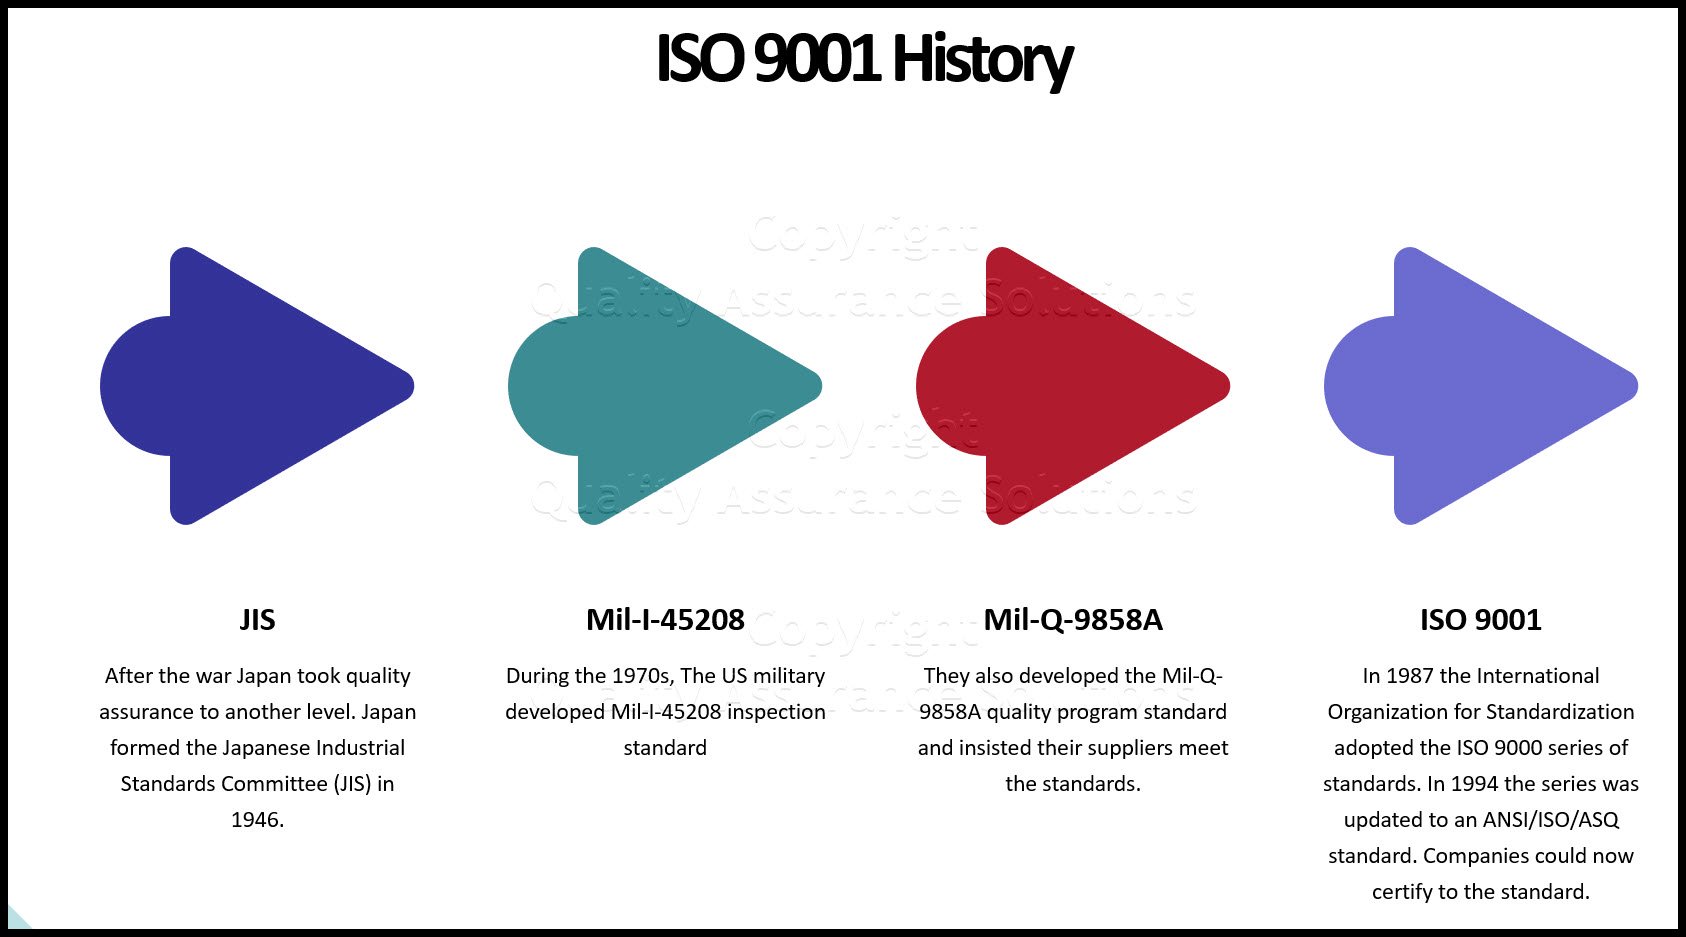 An ISO 9001 overview and history of the standard. Discusses prior quality assurance management standards and the evolution of ISO 9001. 